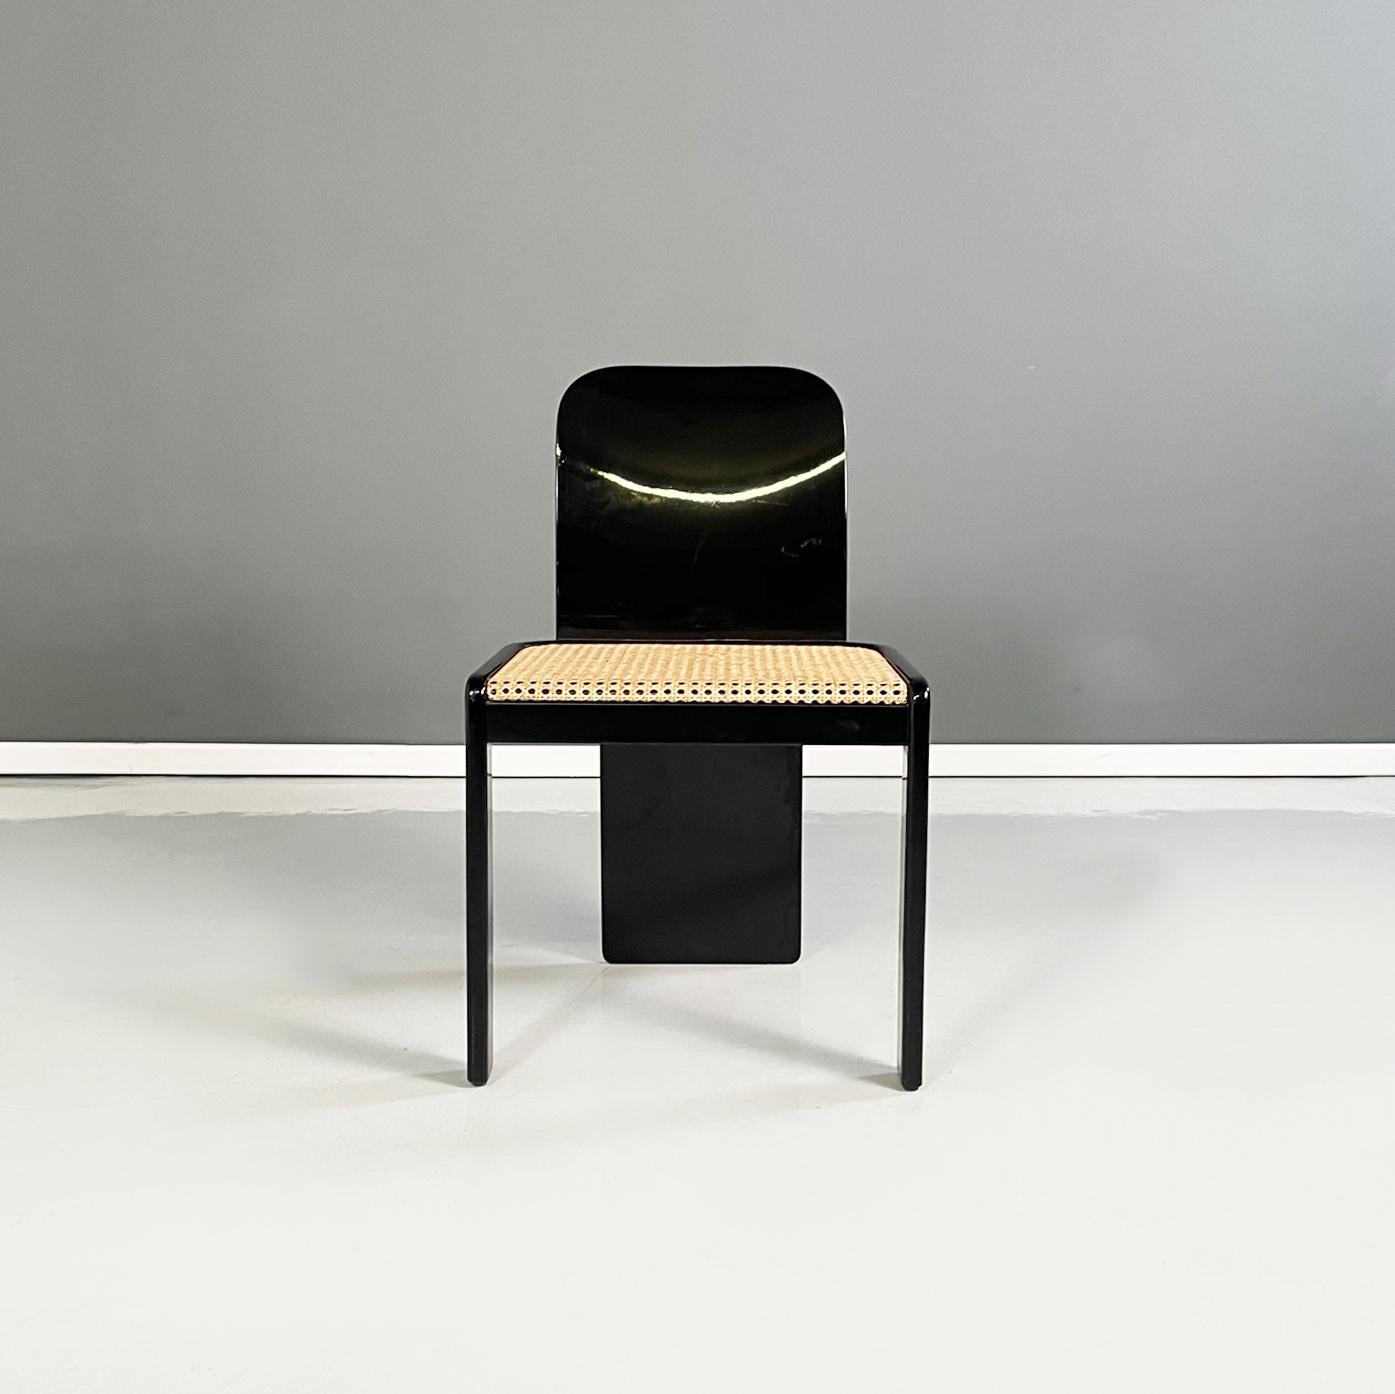 Mid-20th Century Italian Modern Black Lacquered Wood Chairs by Molinari for Pozzi Milano, 1960s